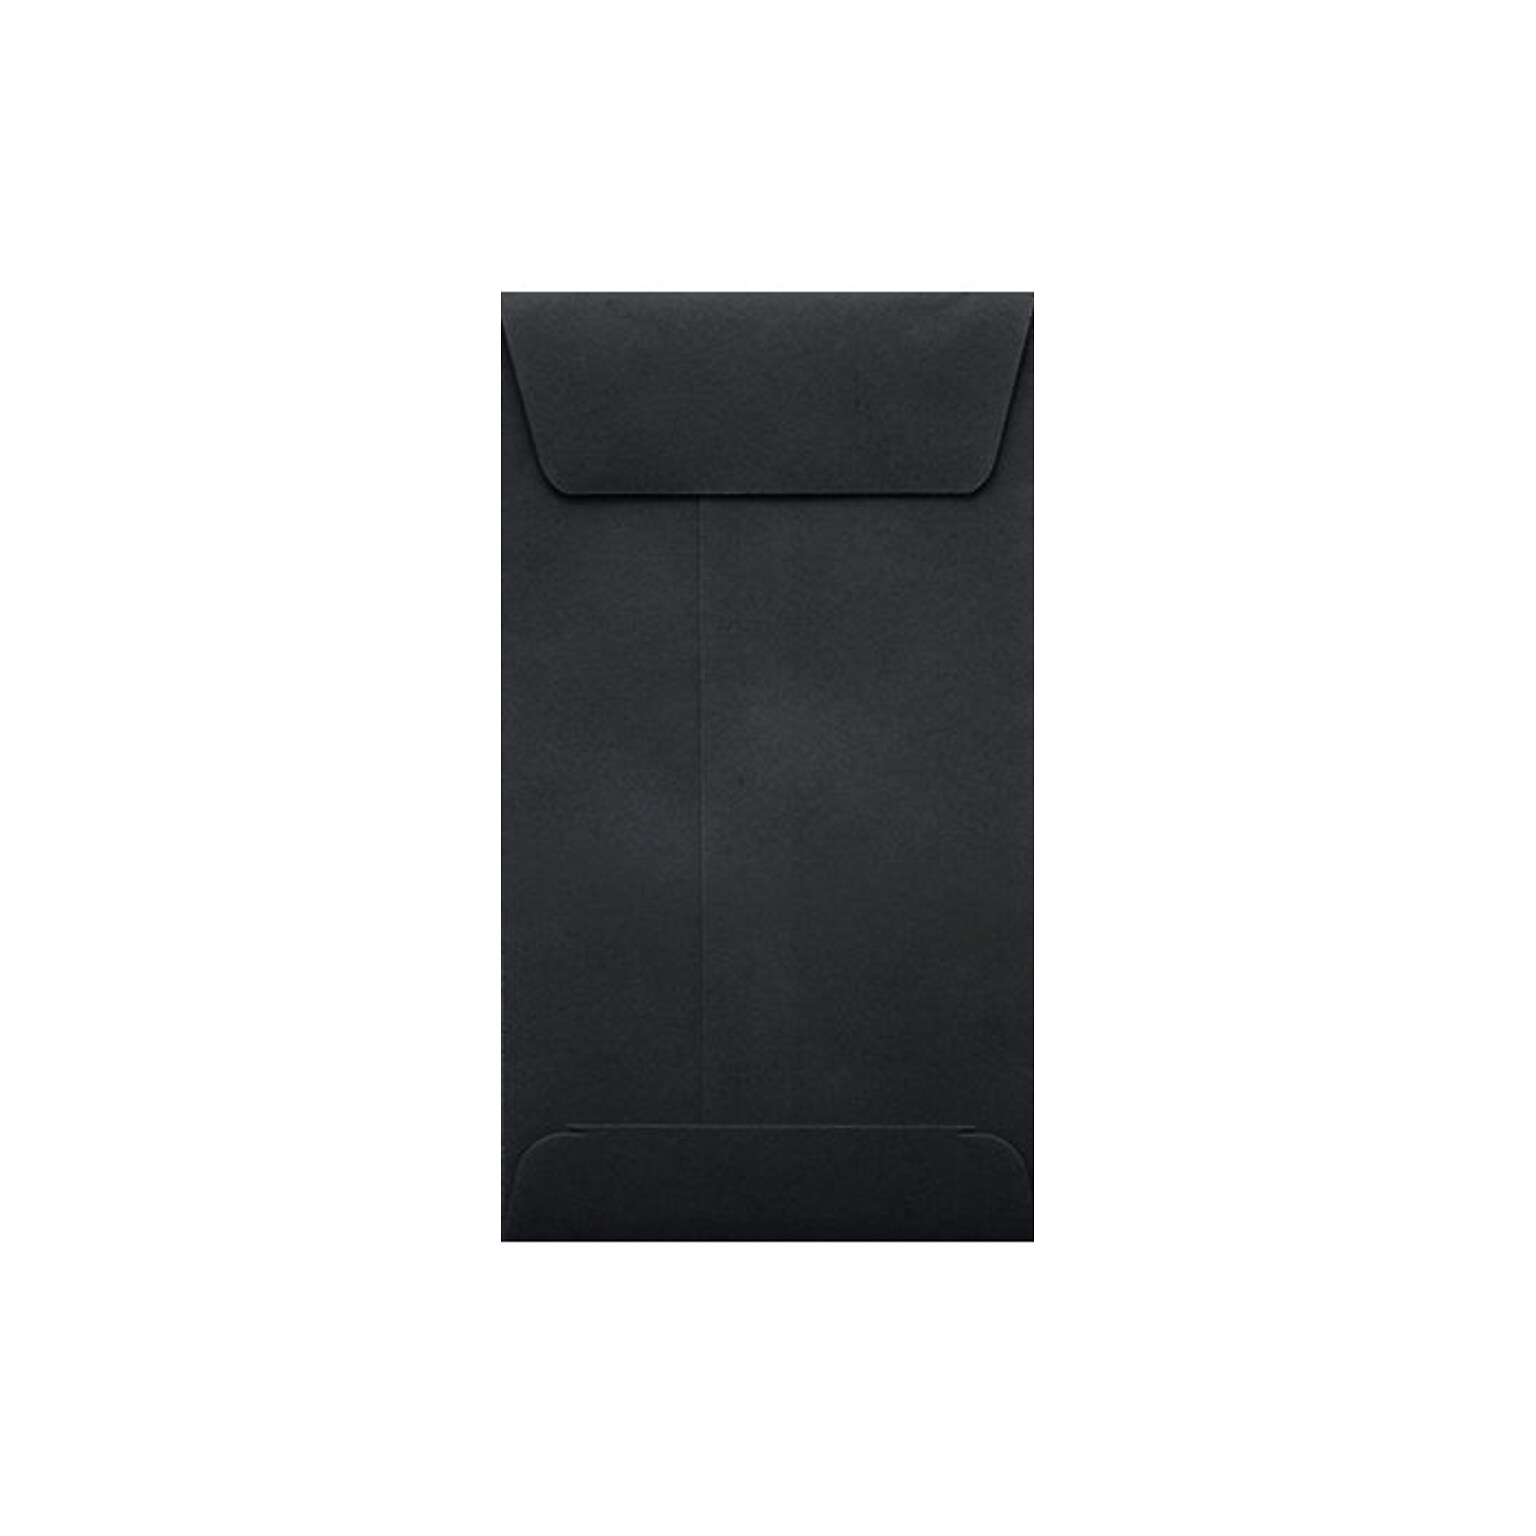 LUX Peel & Seal Self Seal #5 Coin Envelope, 3 1/8 x 5 1/2, Midnight Black, 1000/Box (LUX-512CO-B-1M)